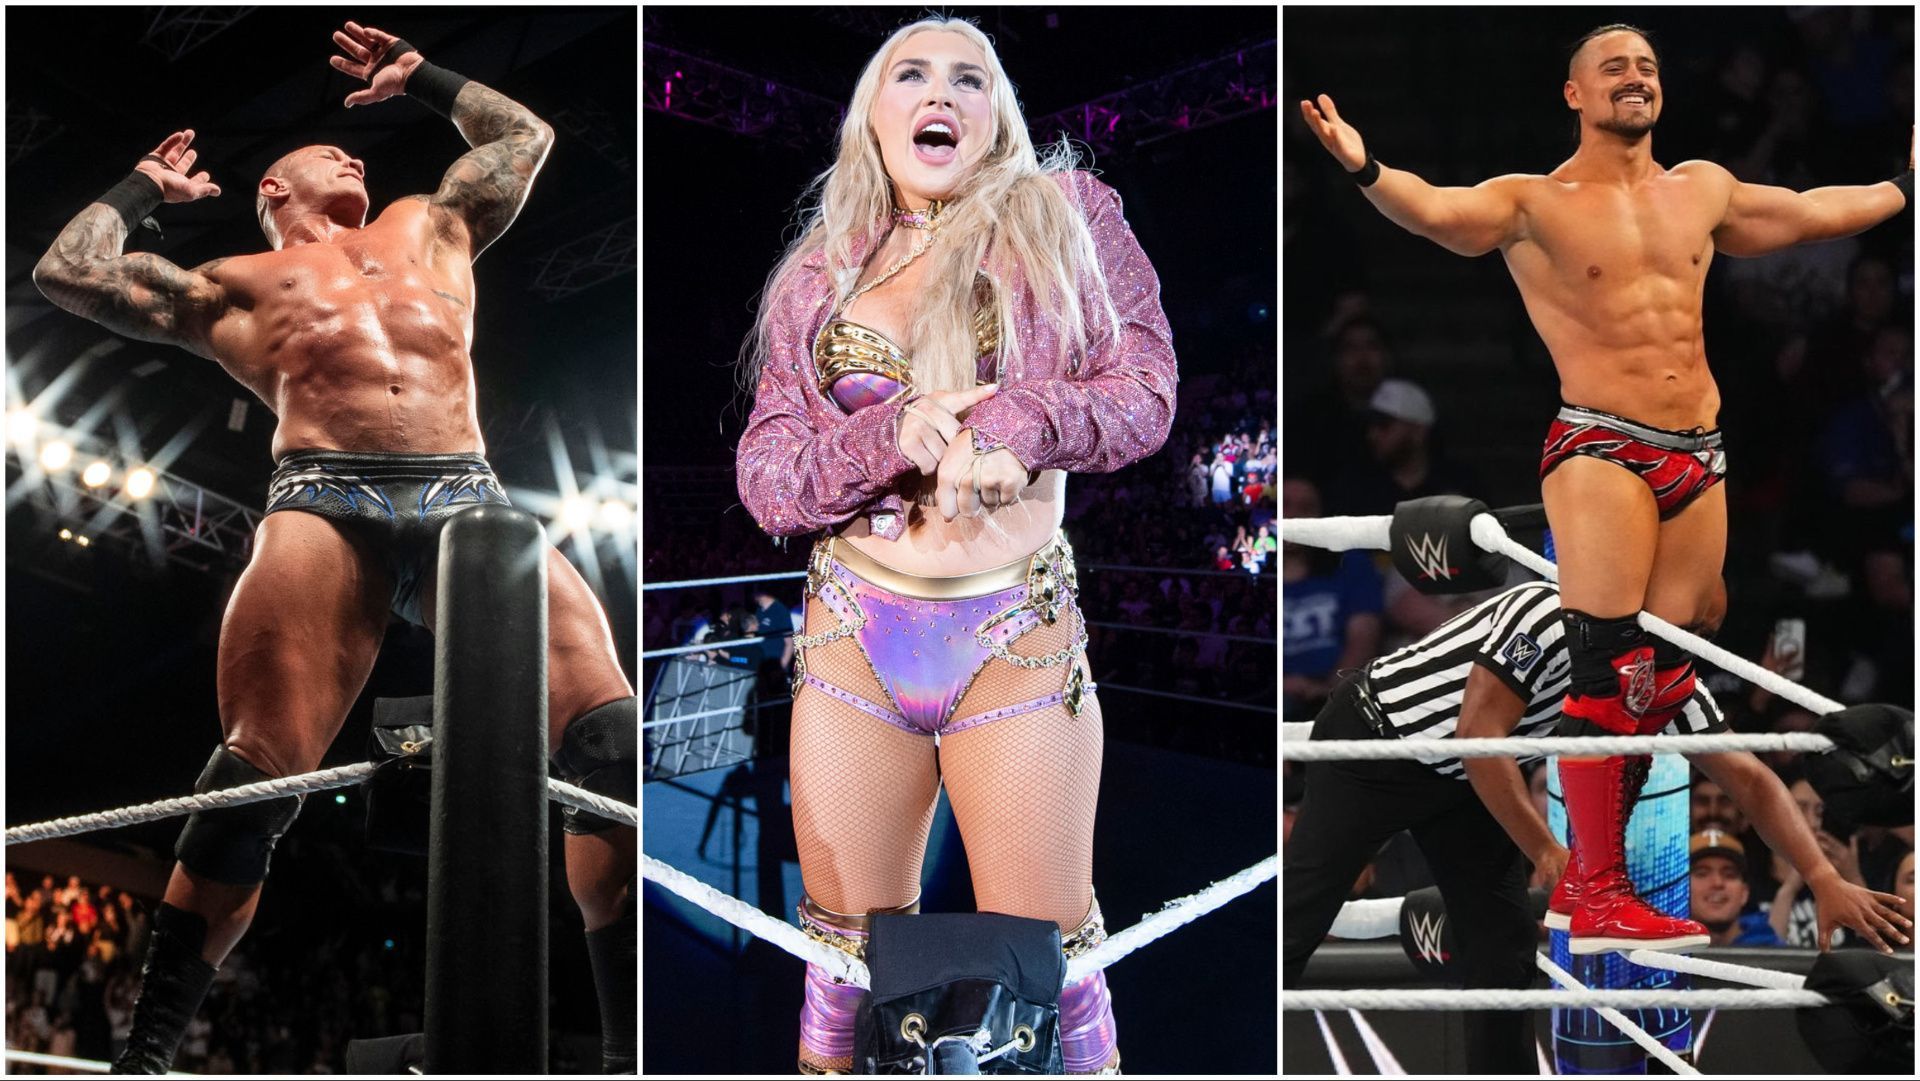 Randy Orton, Tiffany Stratton, and Angel pose for the WWE Universe